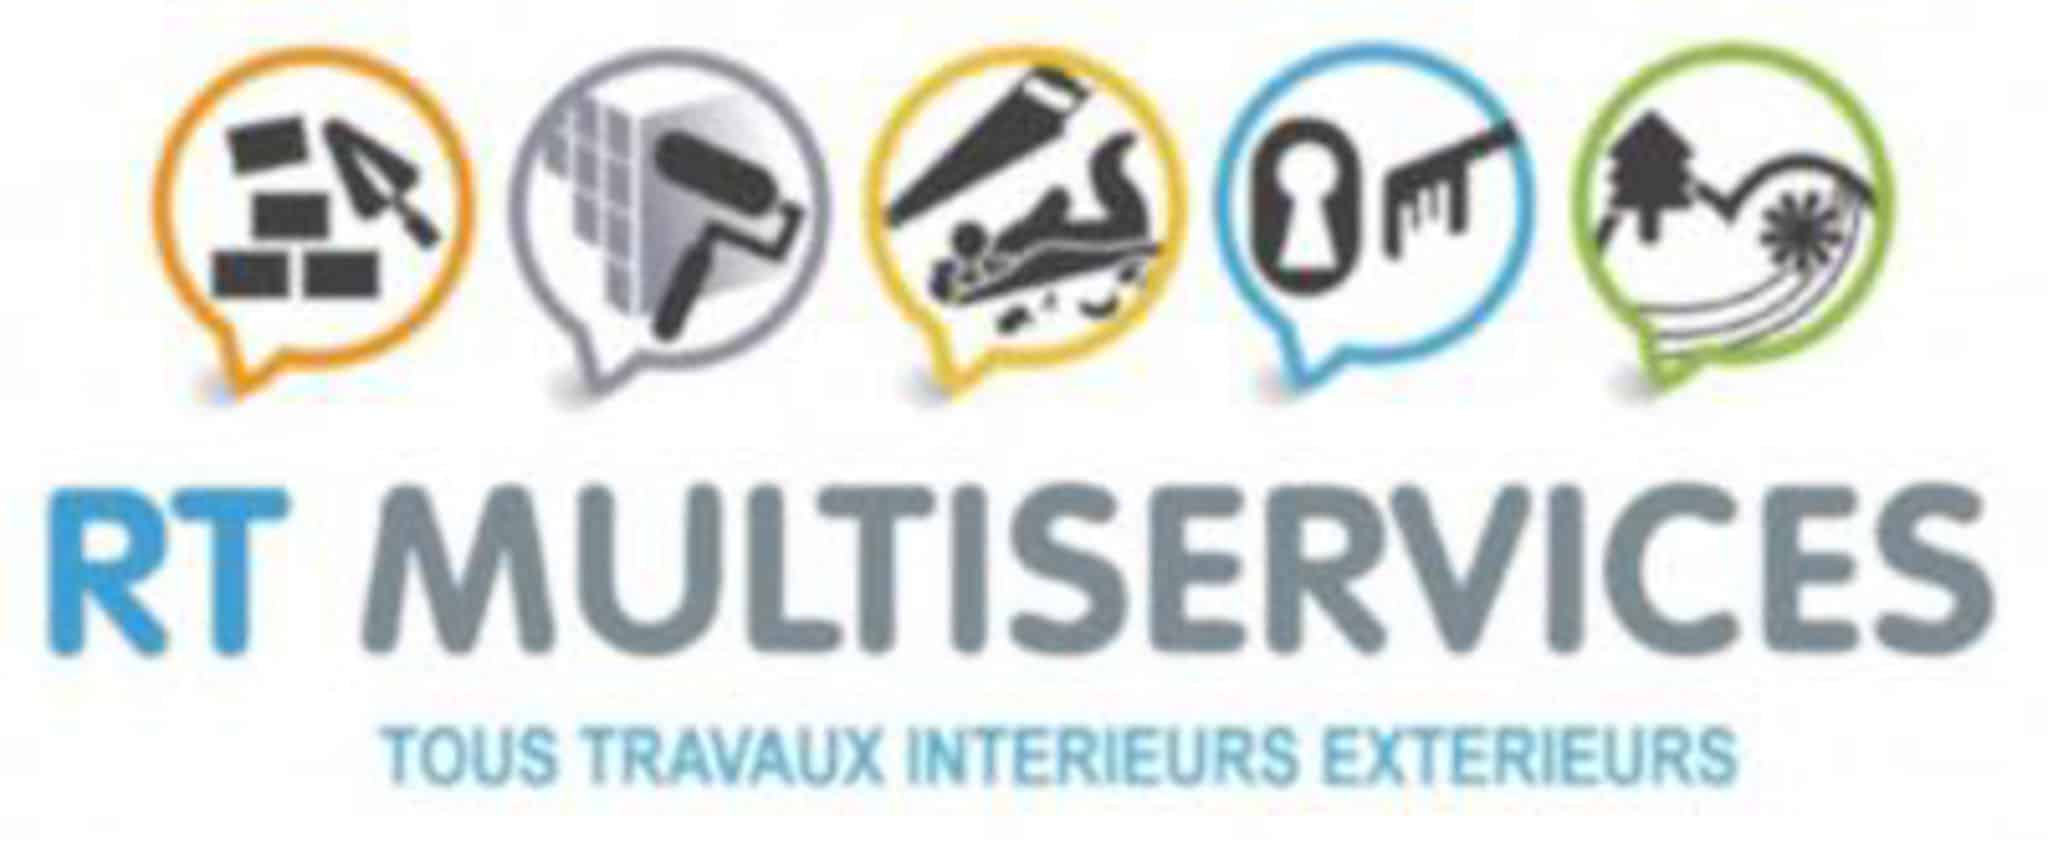 rt multiservices